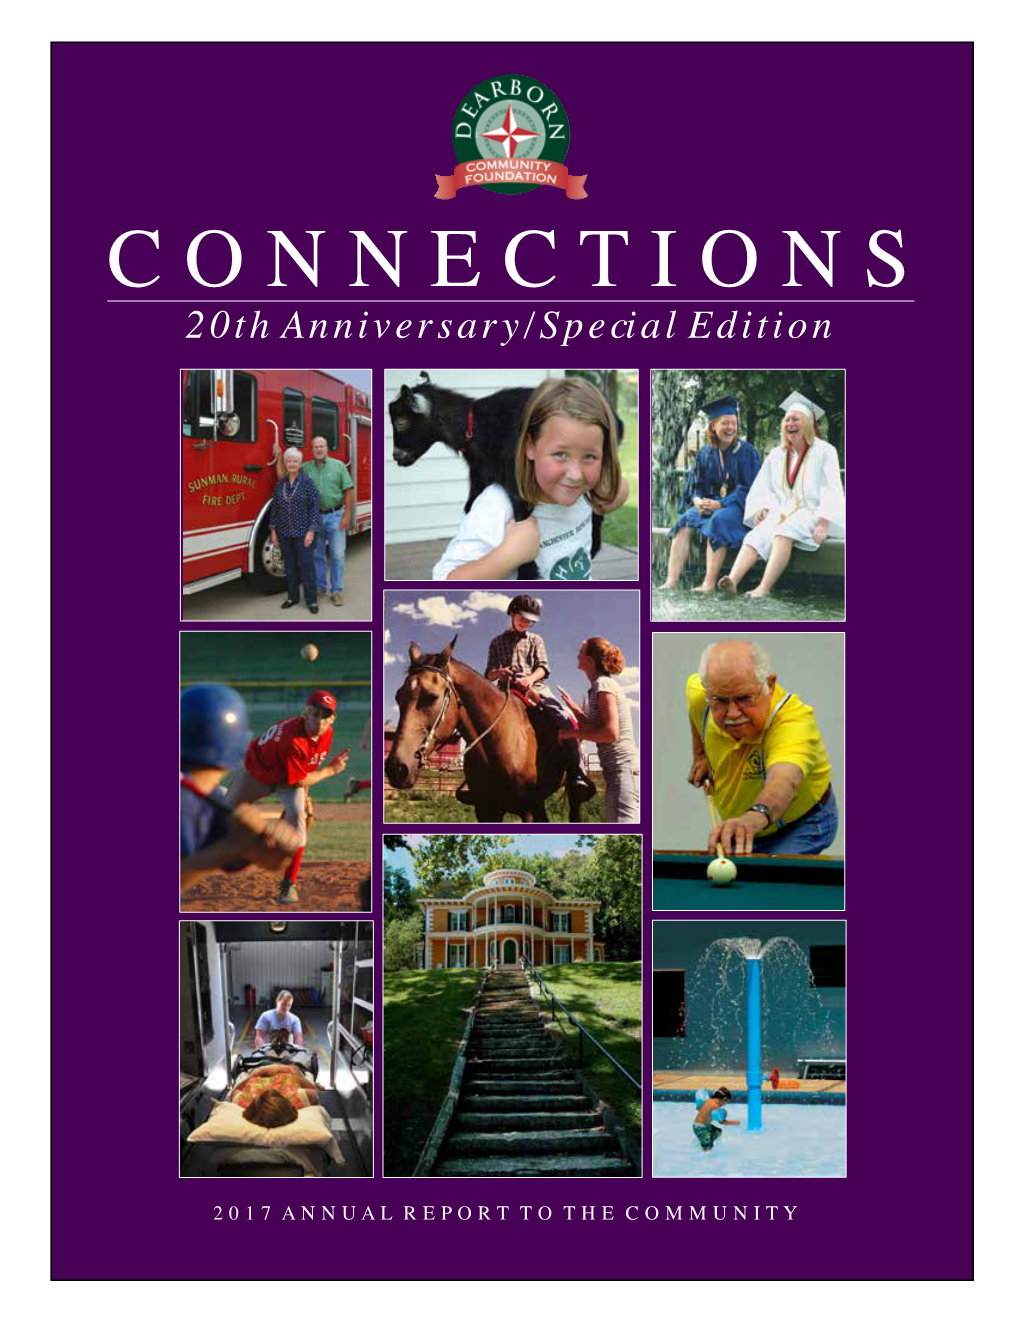 2017 Annual Report to the Community/20Th Anniversary